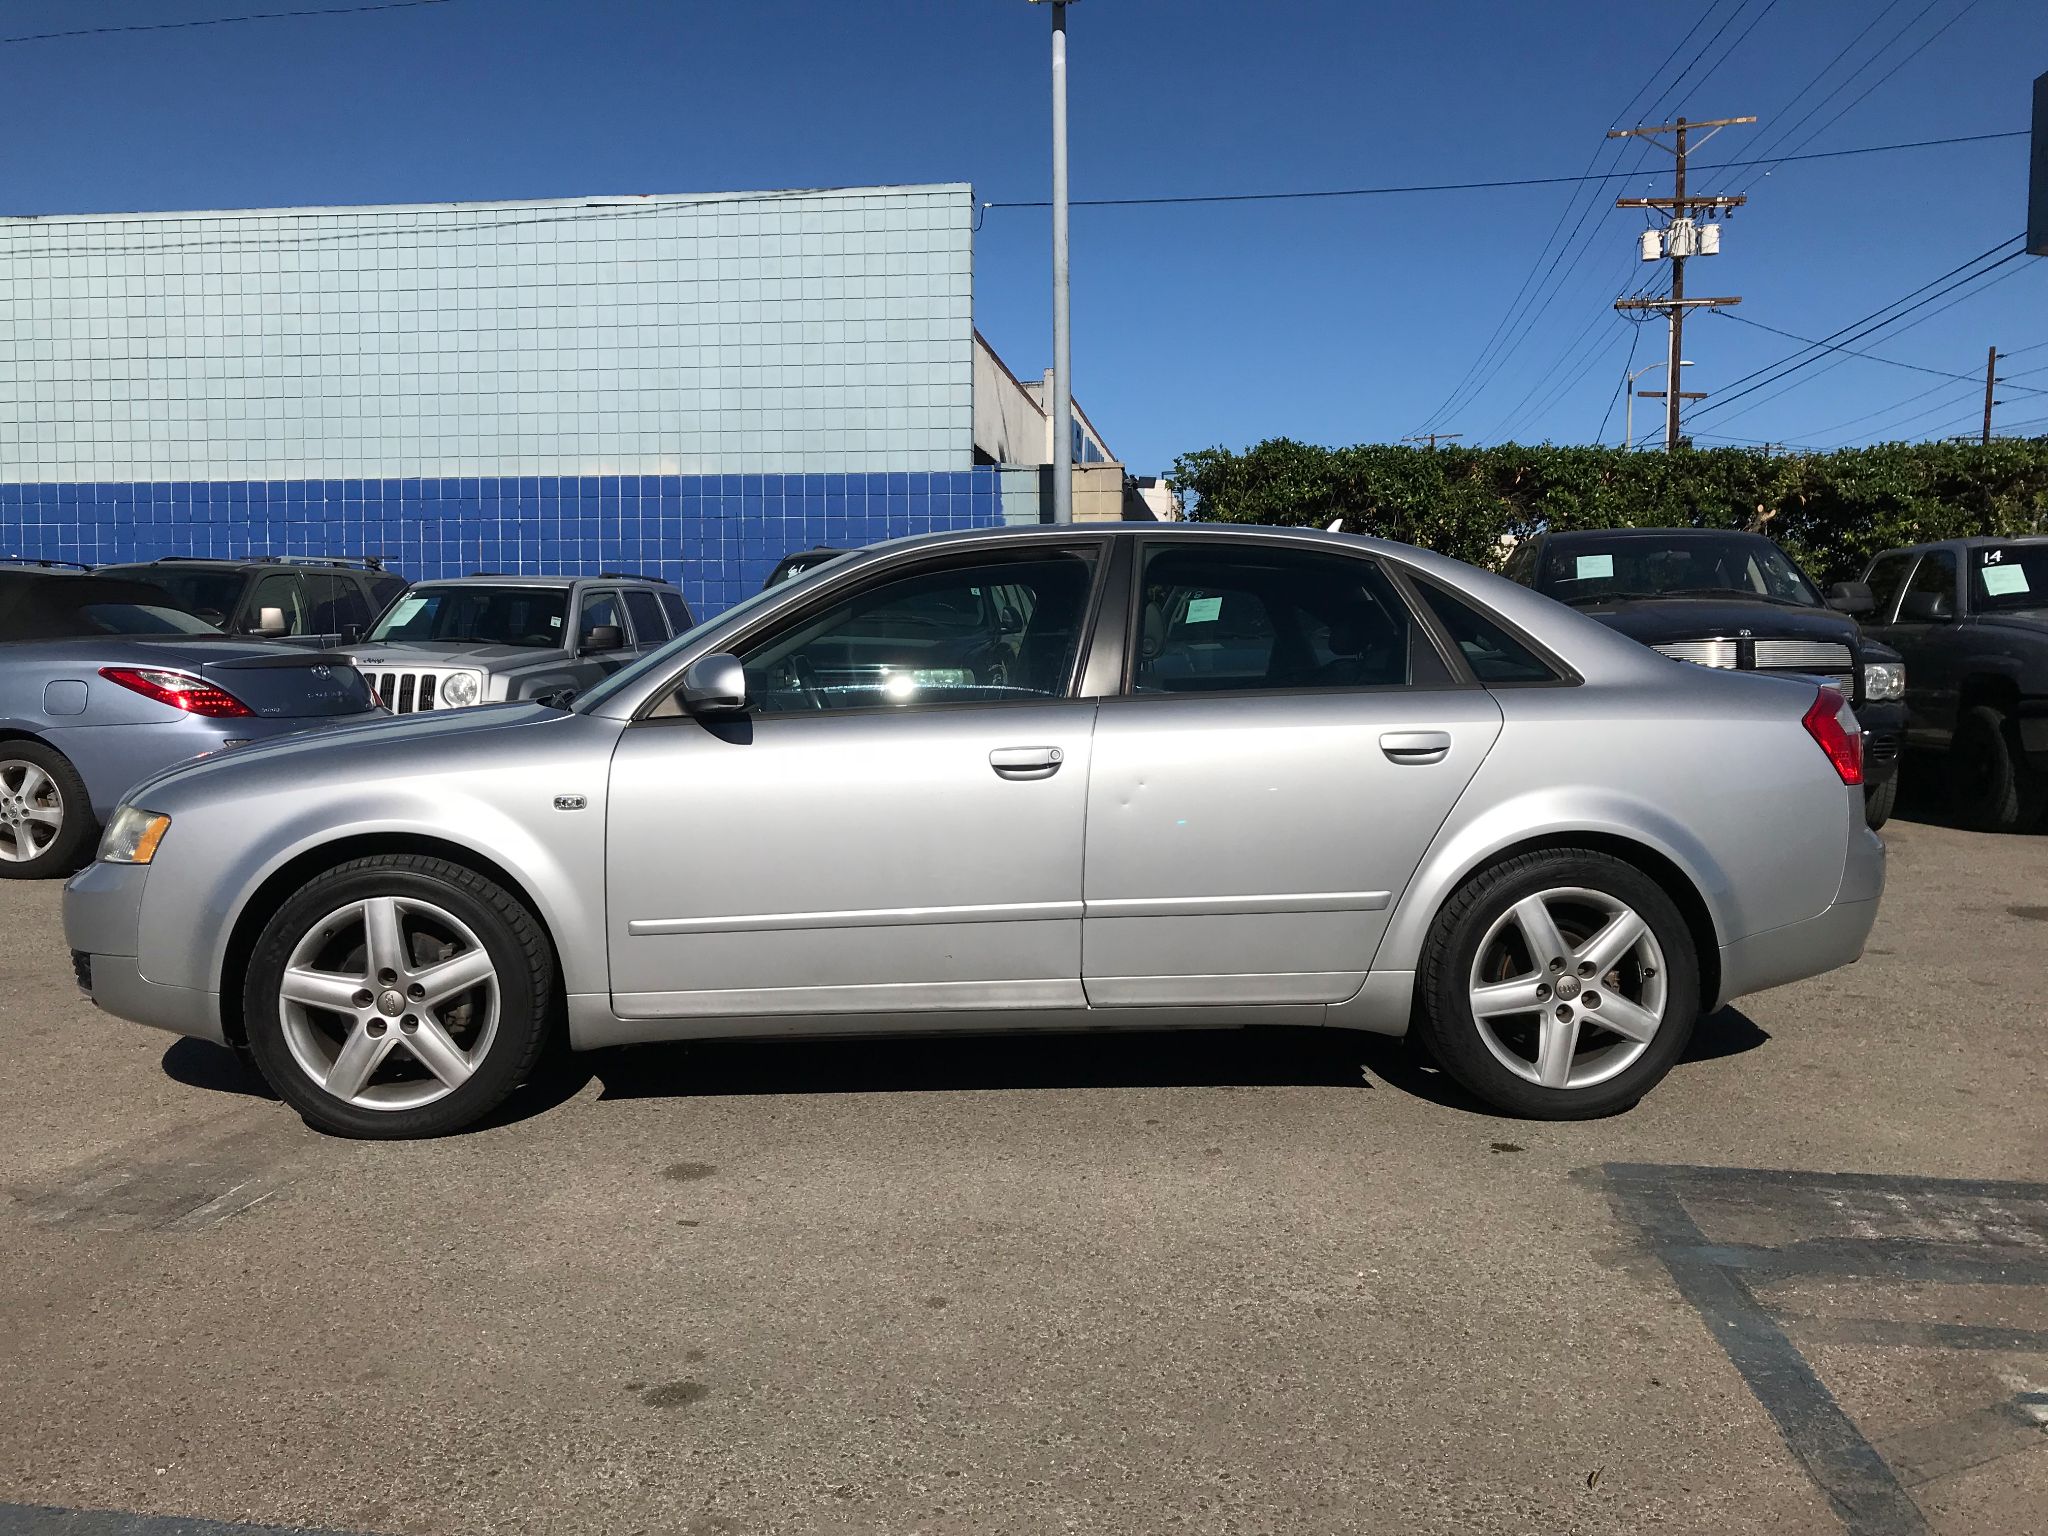 Used 2005 Audi A4 1.8T at City Cars Warehouse INC